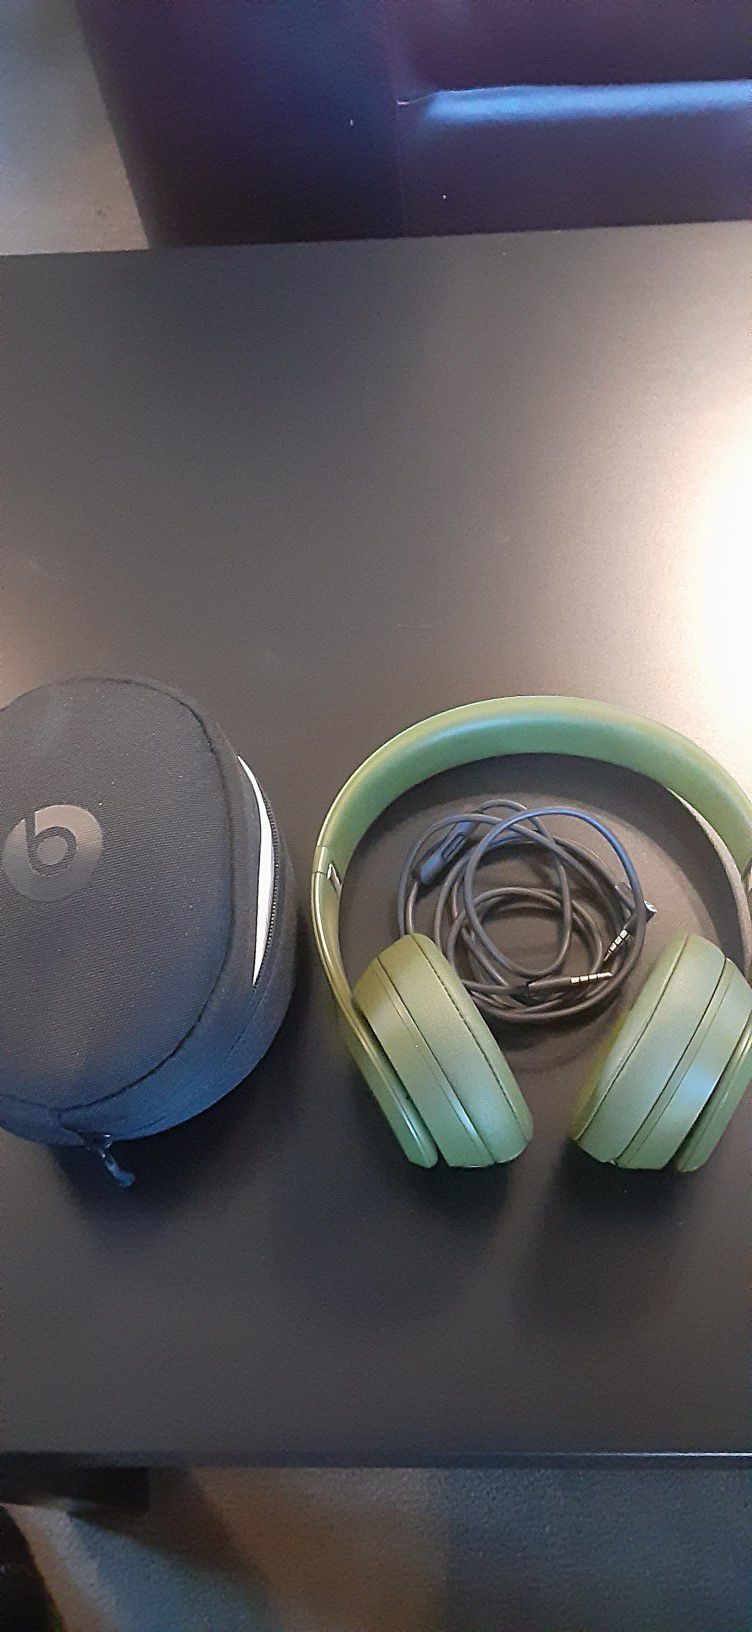 Solo Beats 3 Wireless Headphones with Carrying case